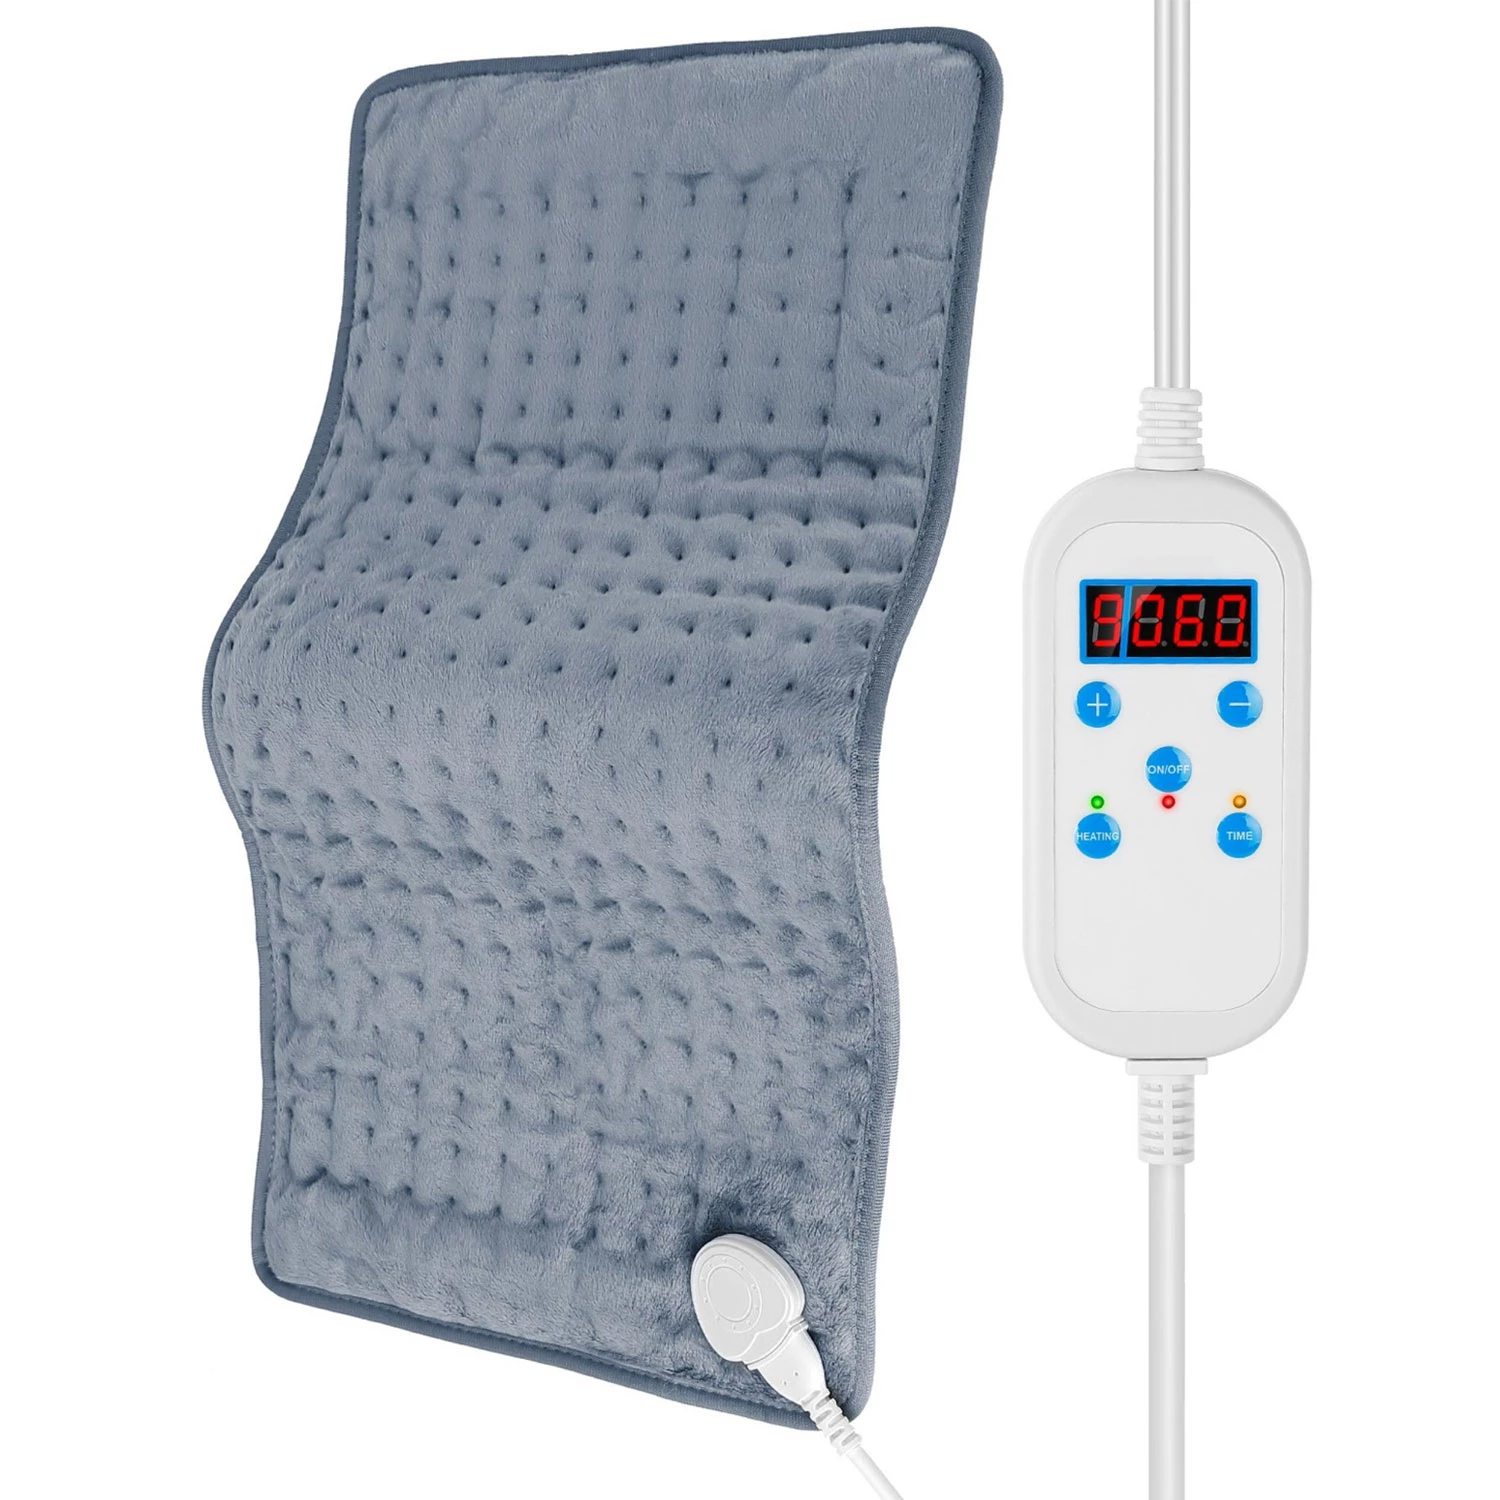 Electric Heating Pad - 22.8x11.4" - Pain Relief for Shoulder, Neck, Back, Spine, Legs, Feet - 9 Temp